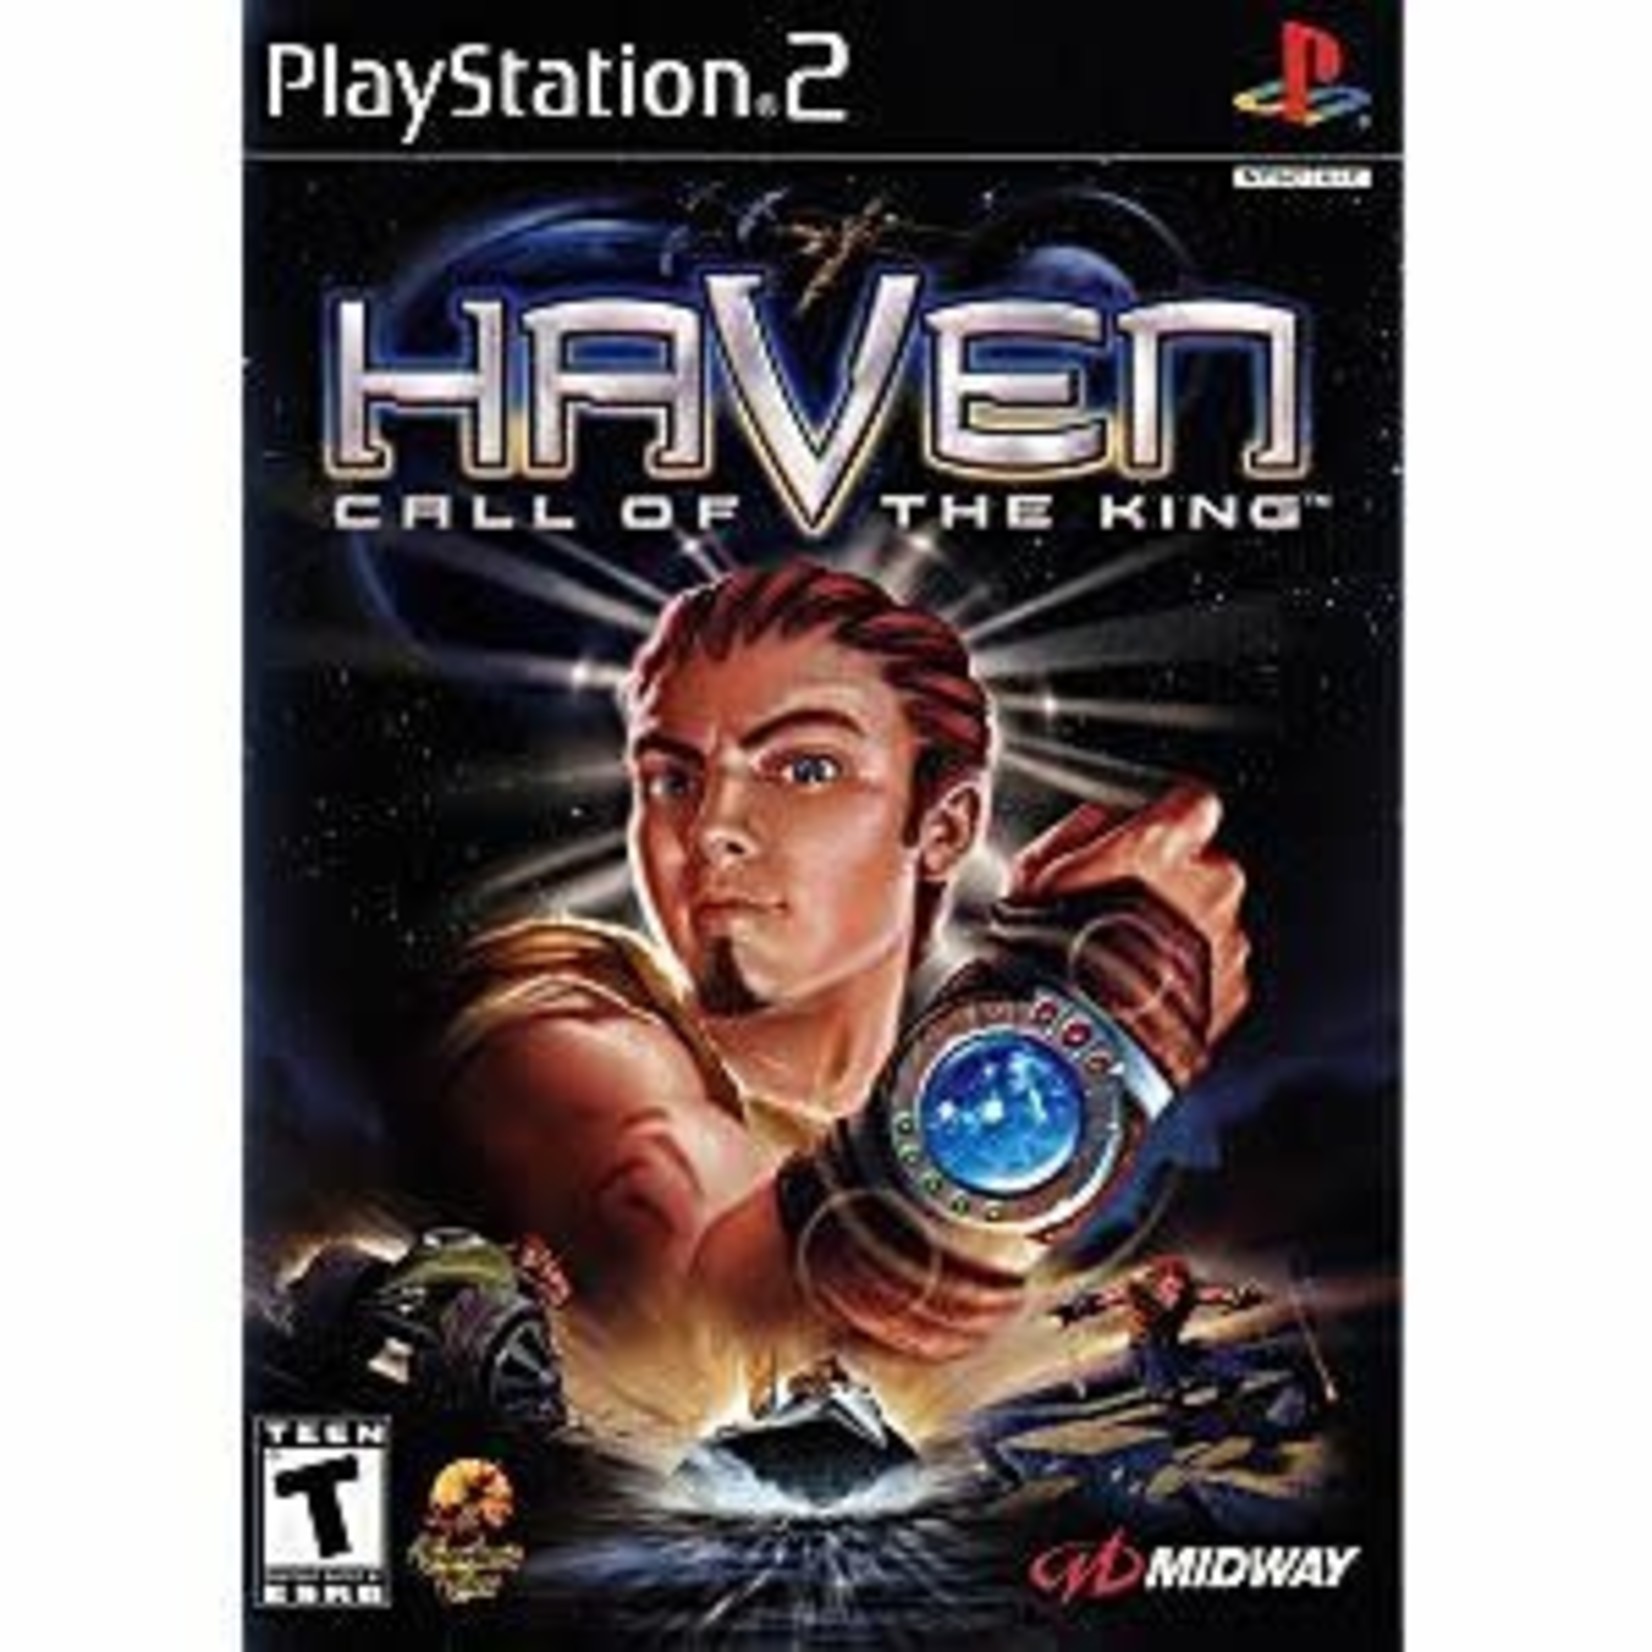 PS2U-HAVEN CALL OF THE KING